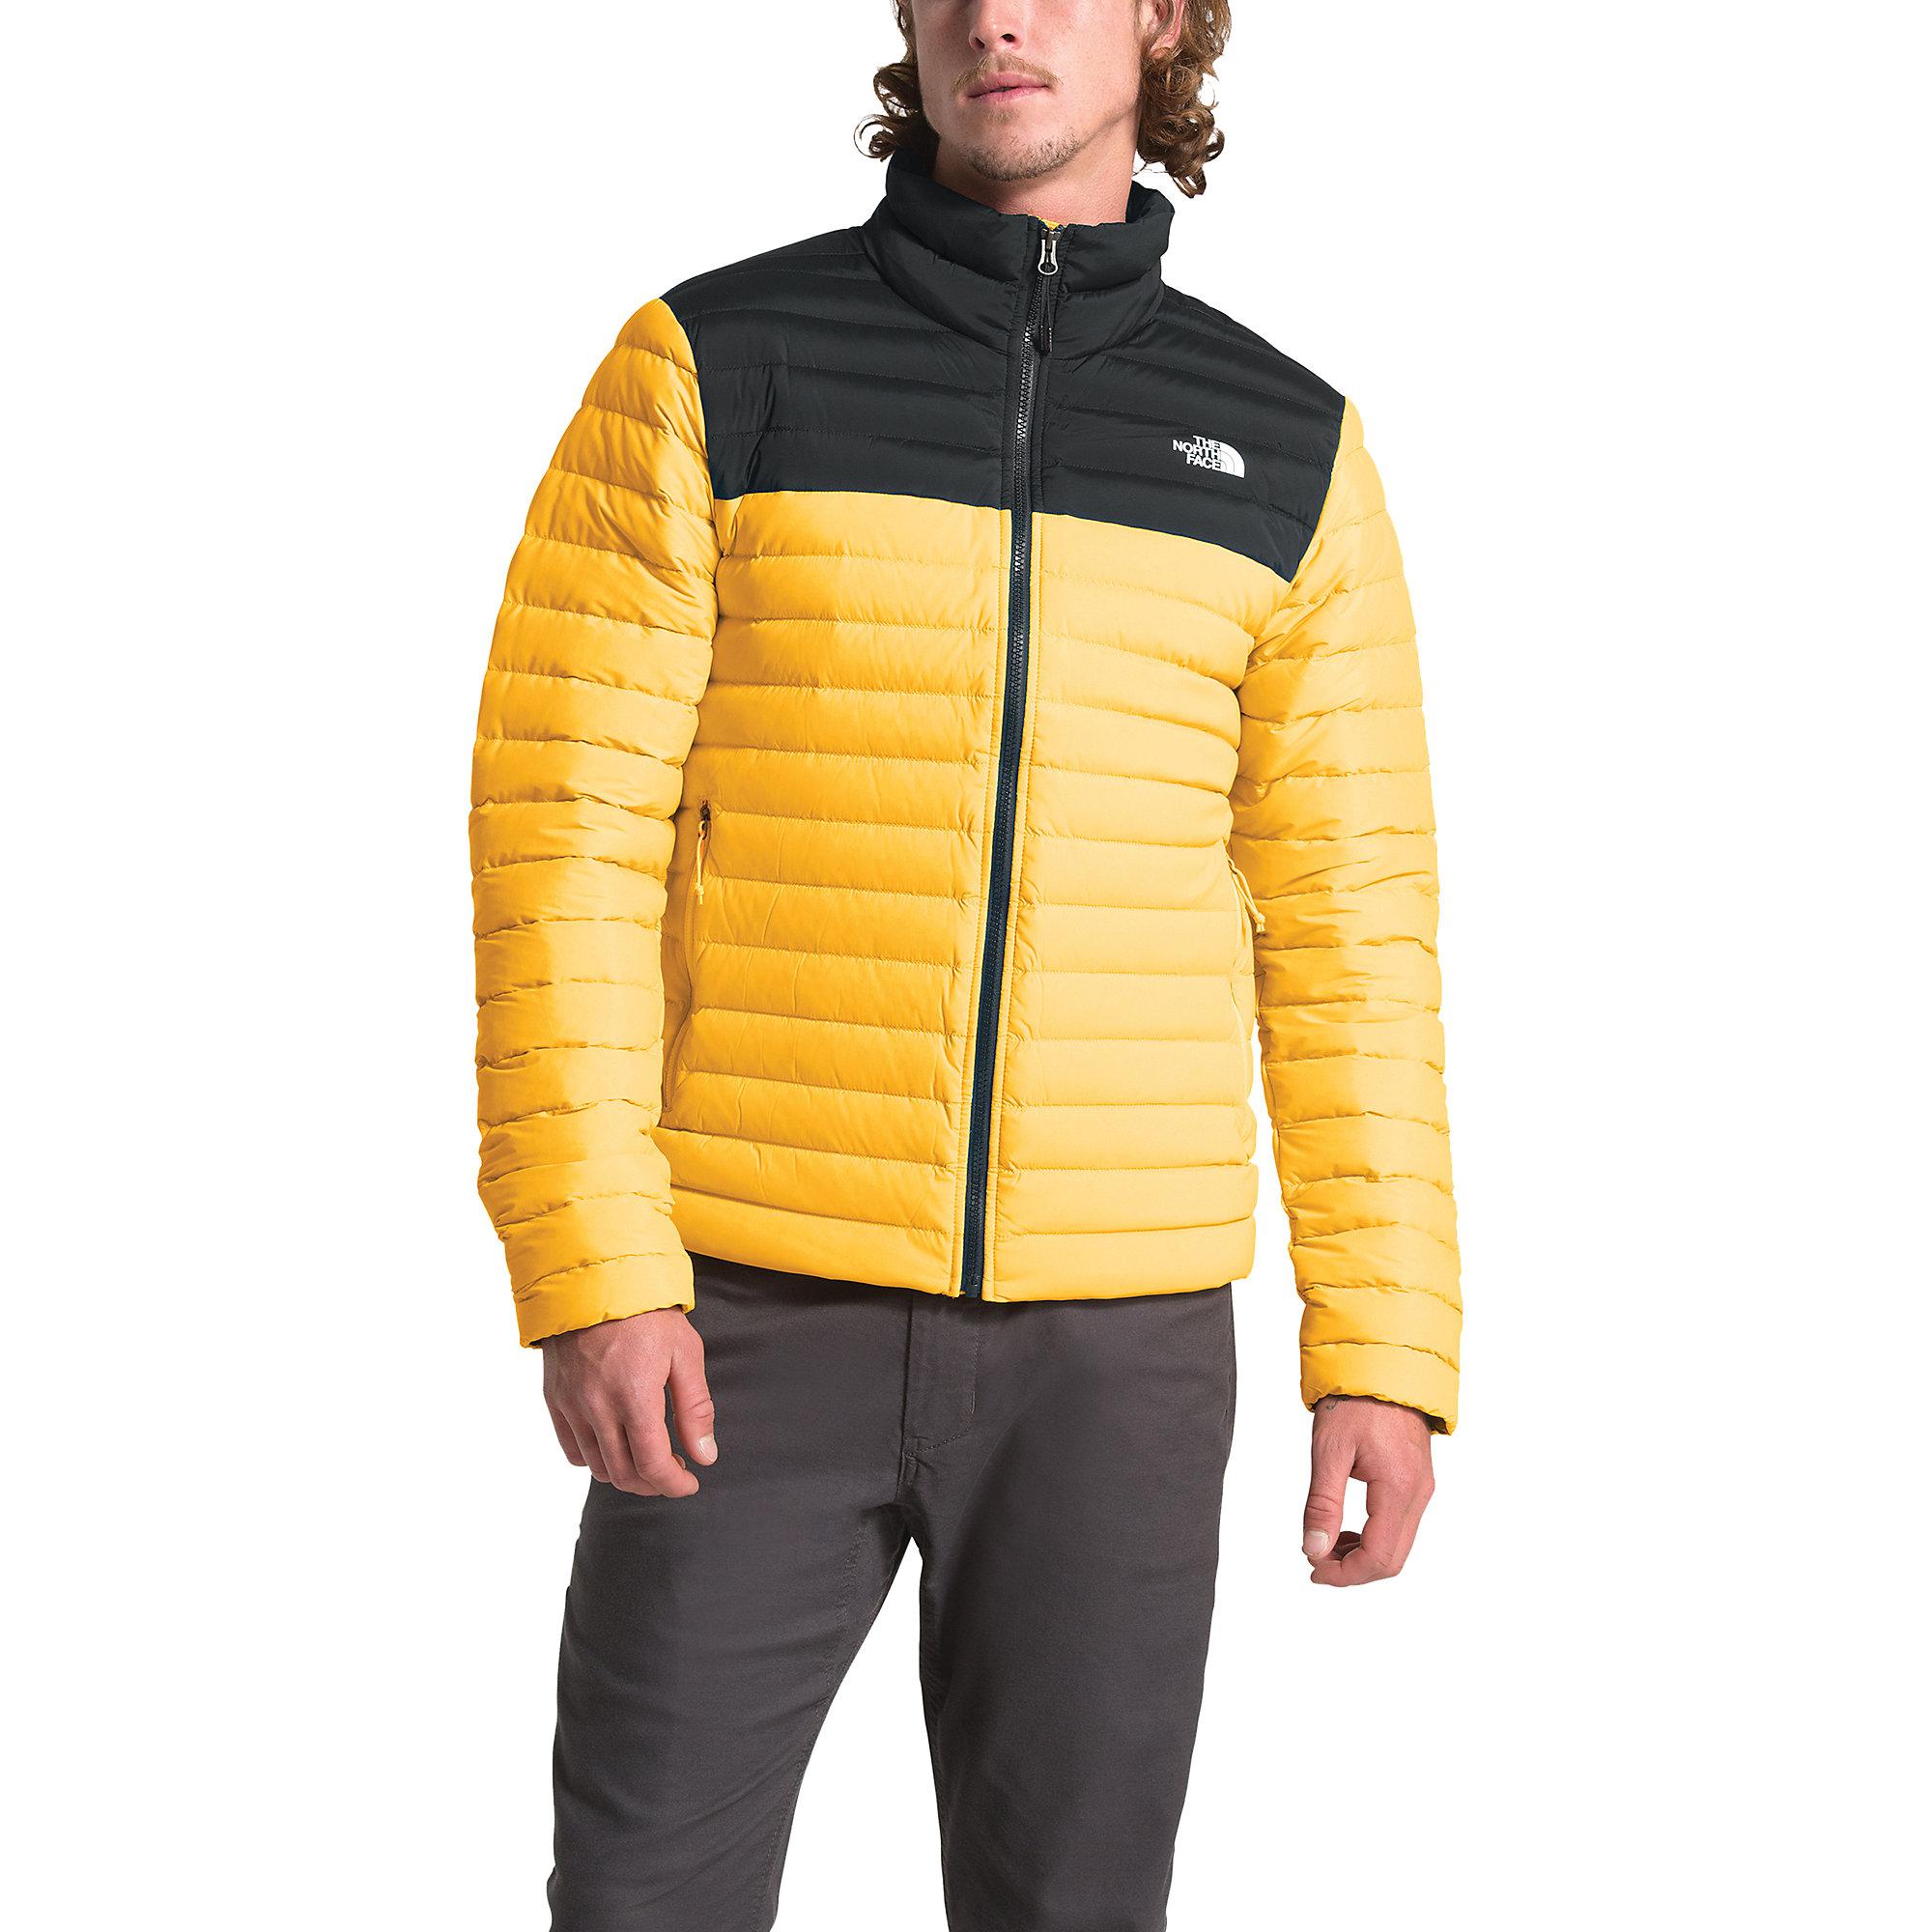 north face down jacket yellow